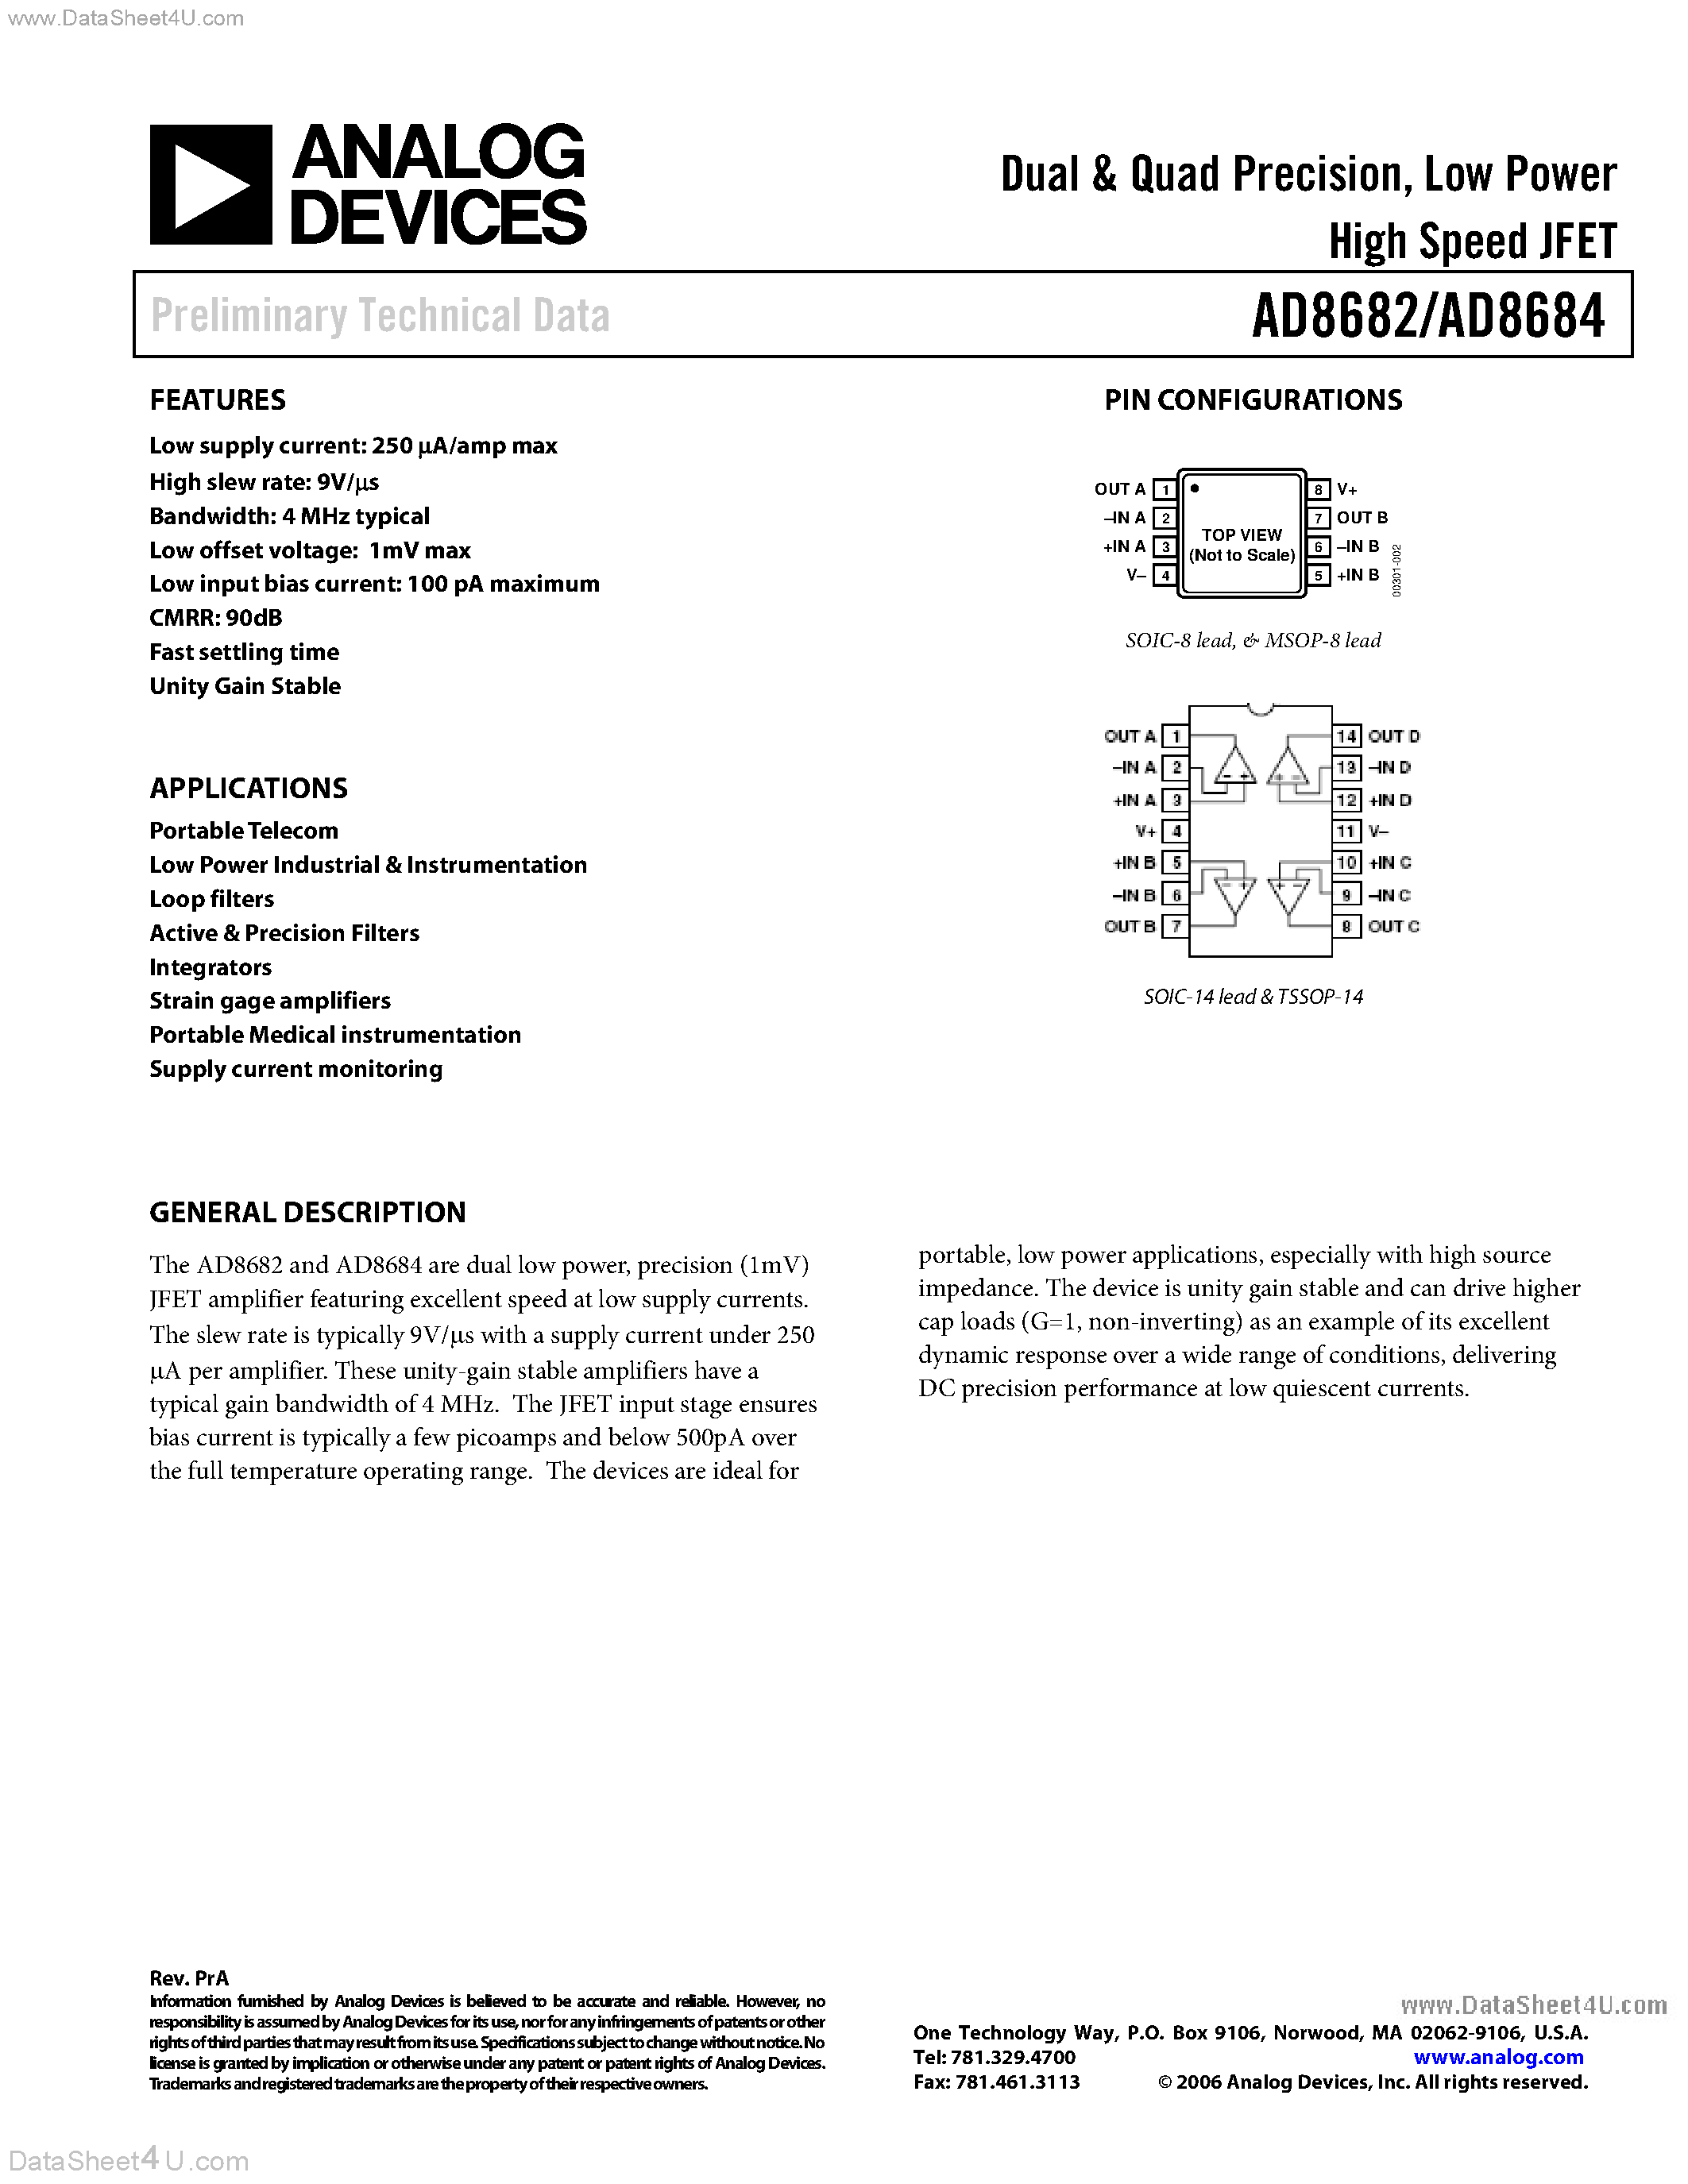 Datasheet AD8682 - (AD8682 / AD8684) Low Power High Speed JFET page 1